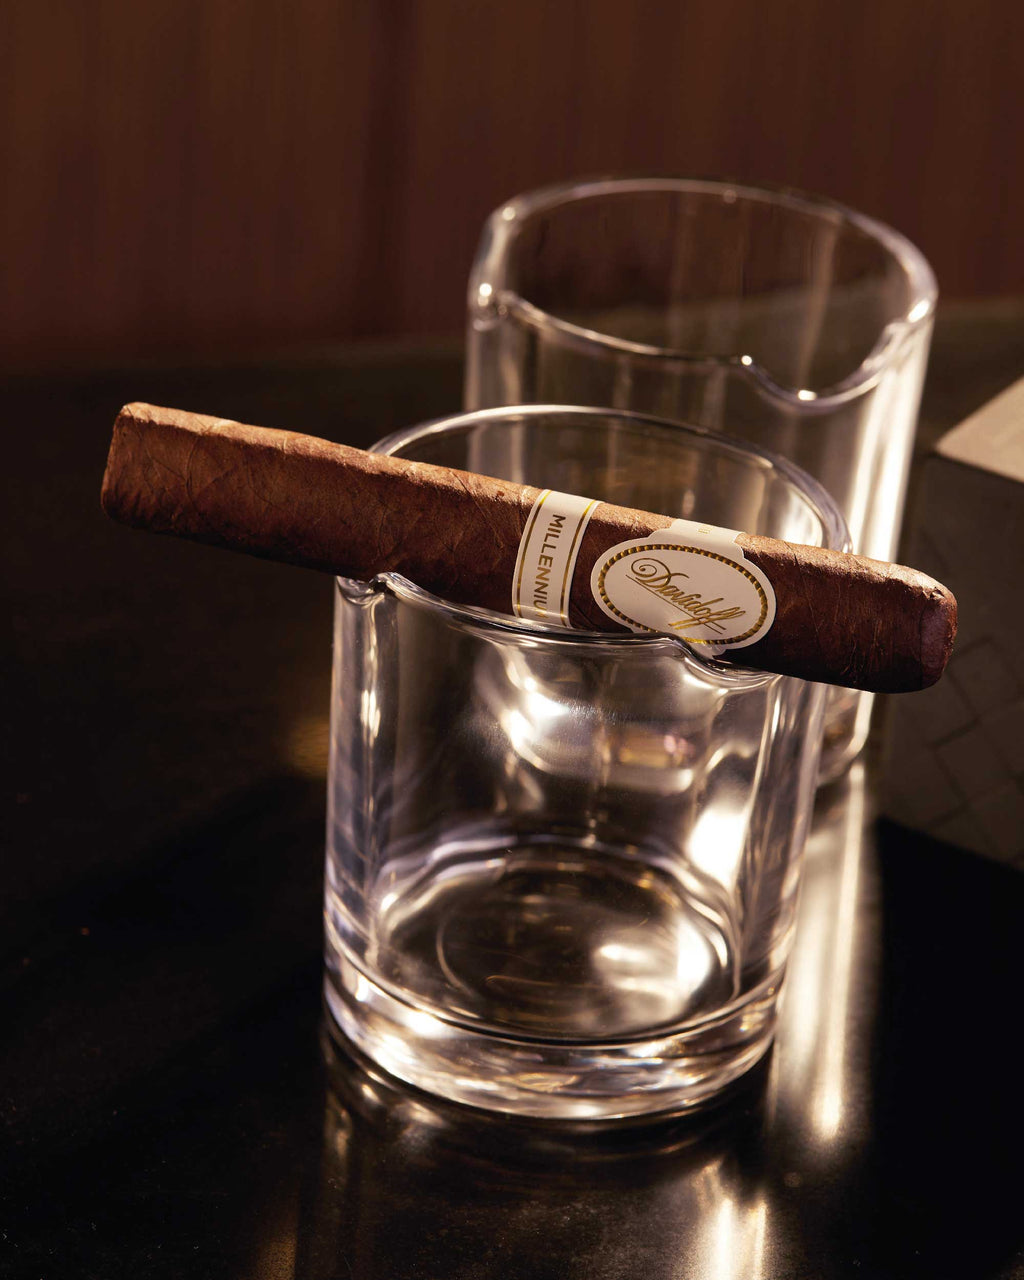 Davidoff «The Difference» Glass Set - Cocktail (2 Tumblers) (Designate–  nextCIGAR